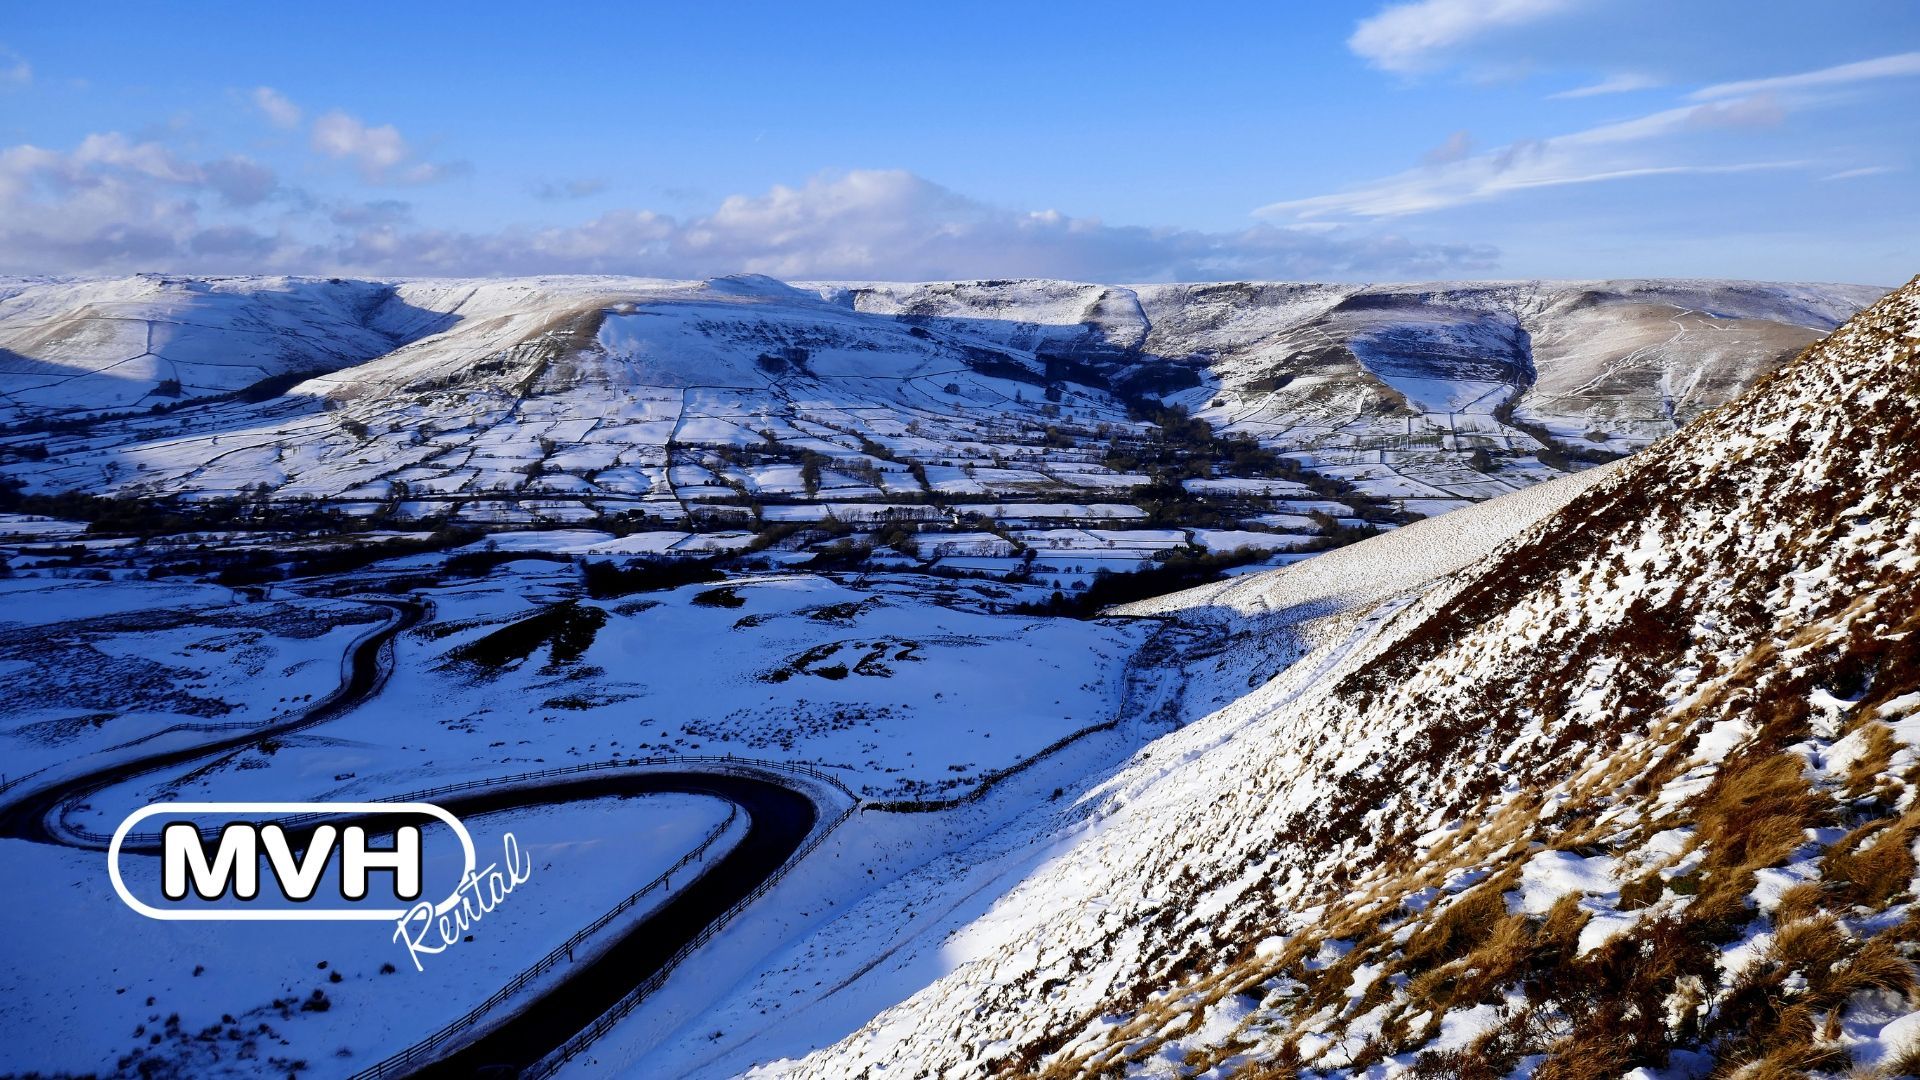 'Tis the season… for a road trip! Fill your tank and grab your A to Z as we explore three unmissable routes through Britain's winter wonderland.